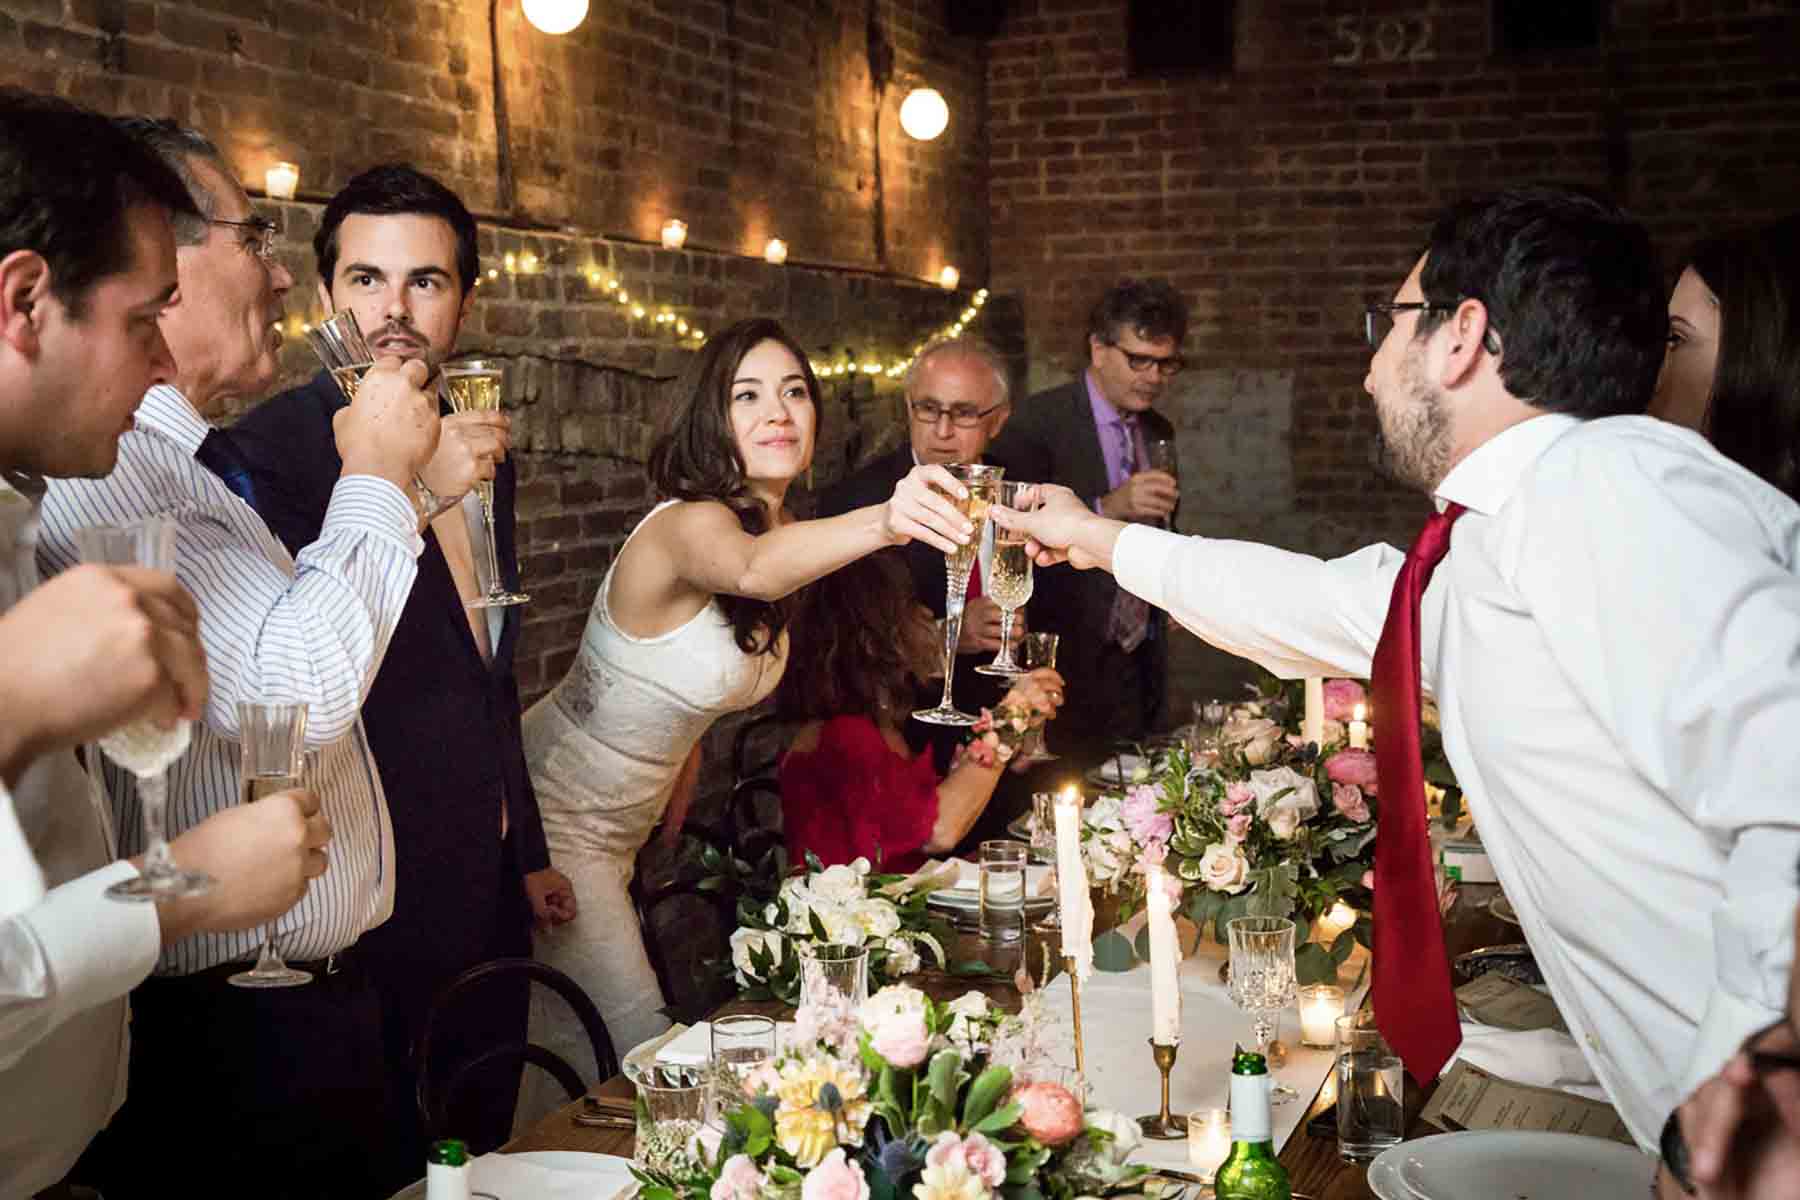 Bride clinking glass with guests at table during reception for an article on how to save money on wedding photography